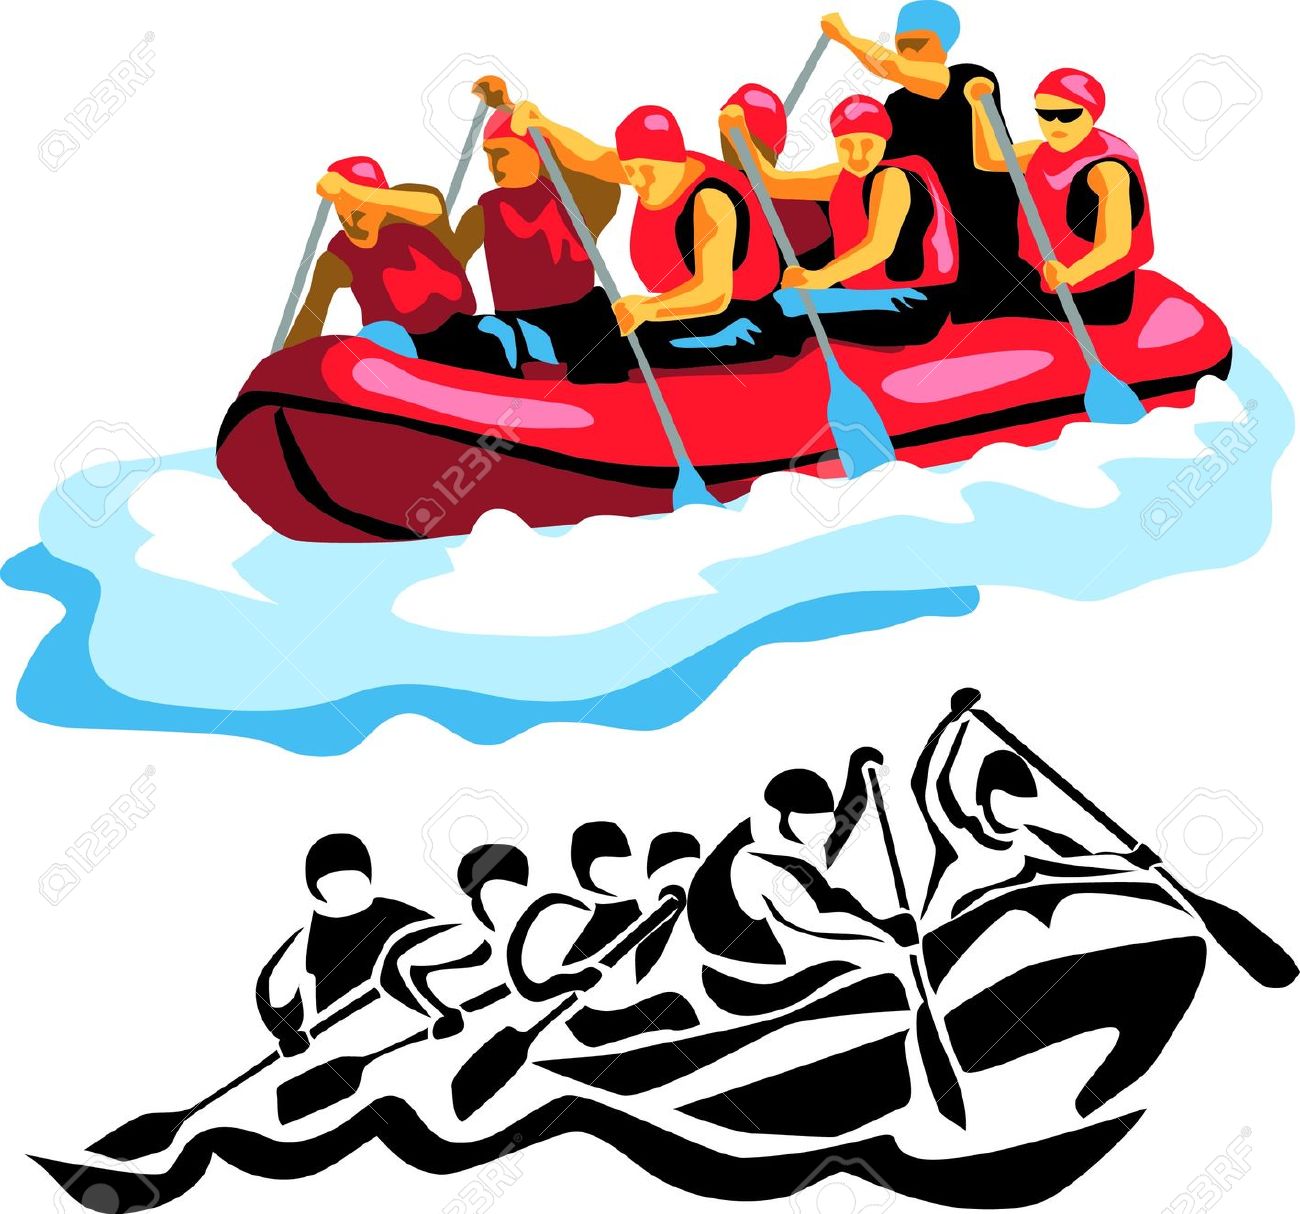 Rafting clipground river royalty. Boats clipart logo